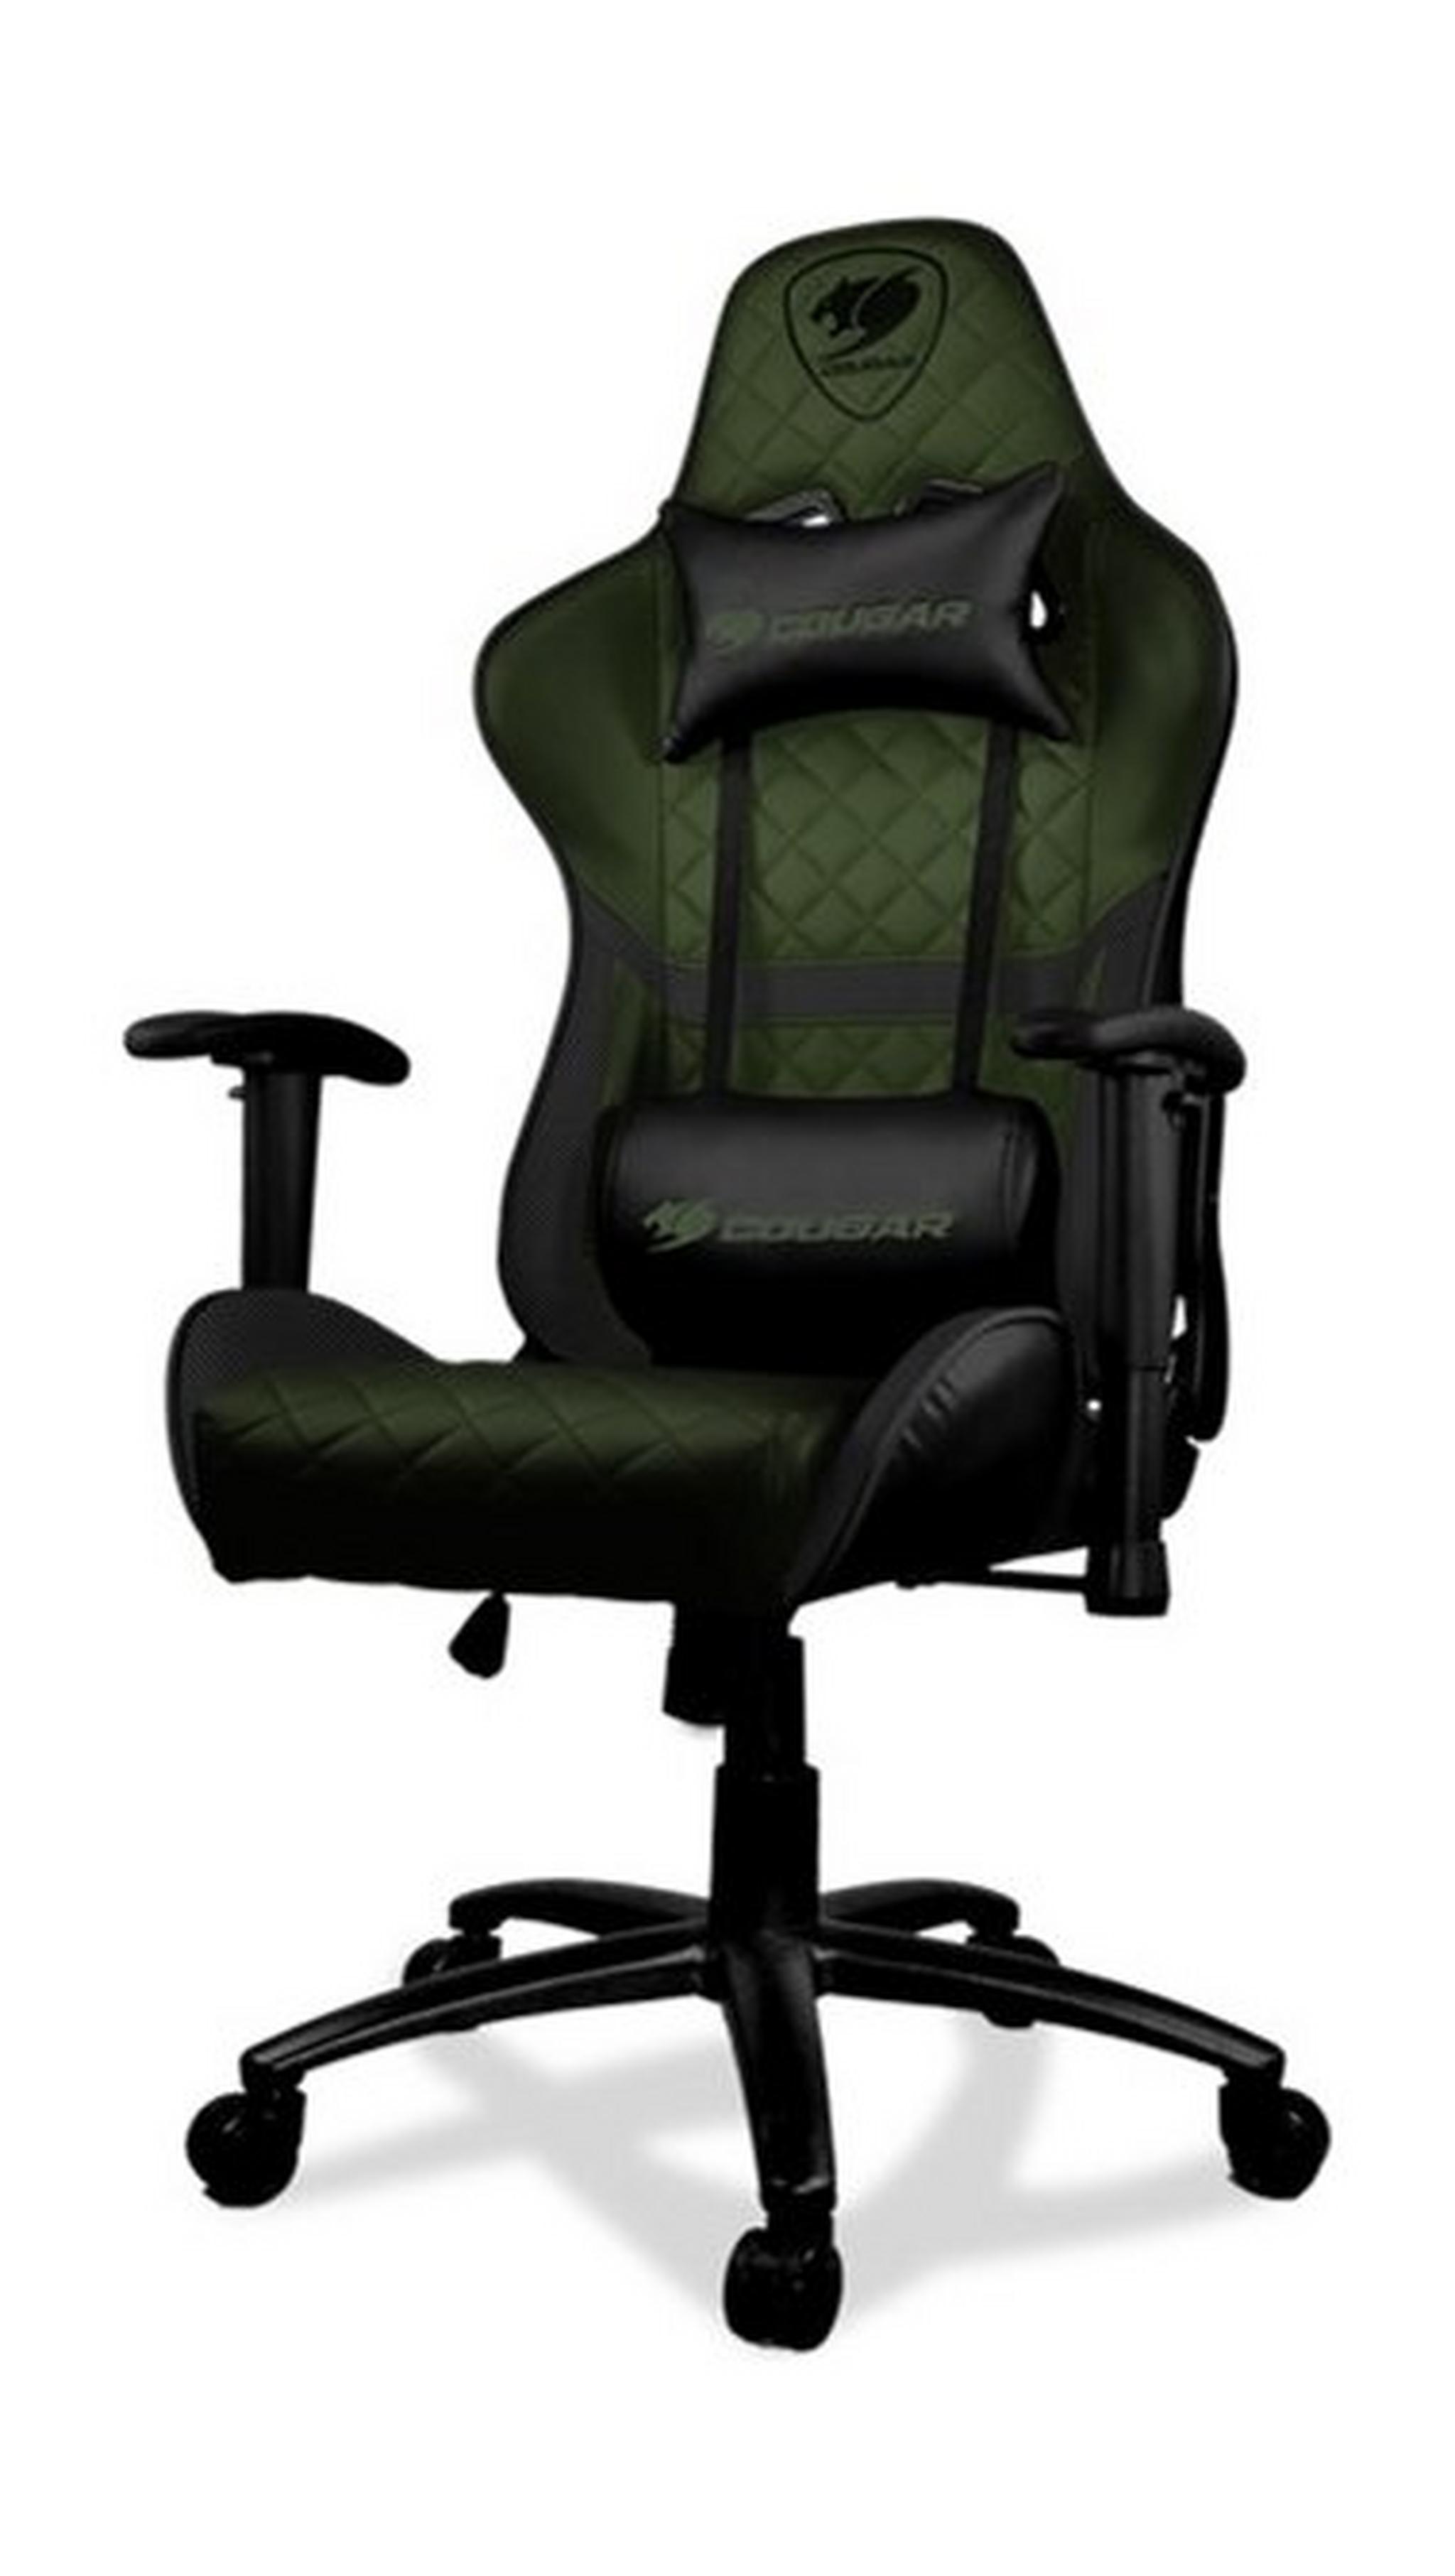 Cougar Armor One X Gaming Chair - Black/Green